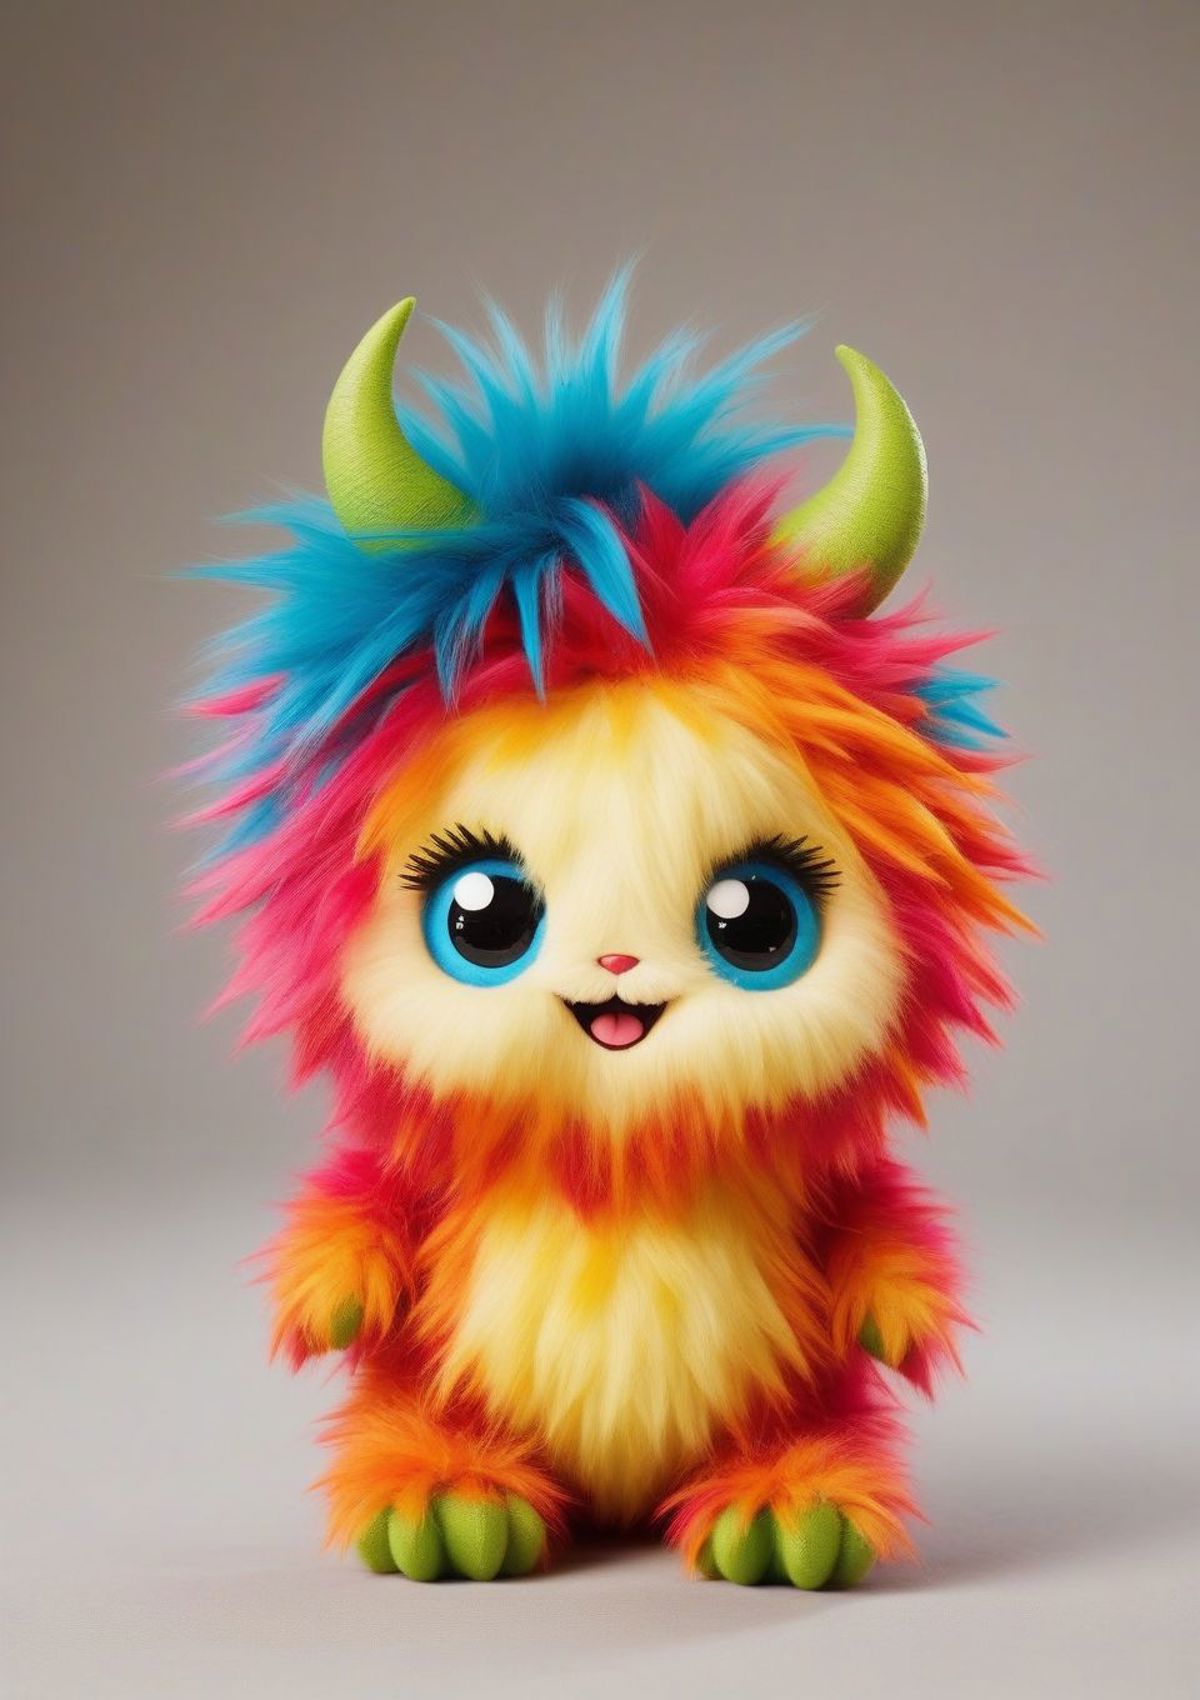 A colorful, fuzzy monster with horns and blue eyes.